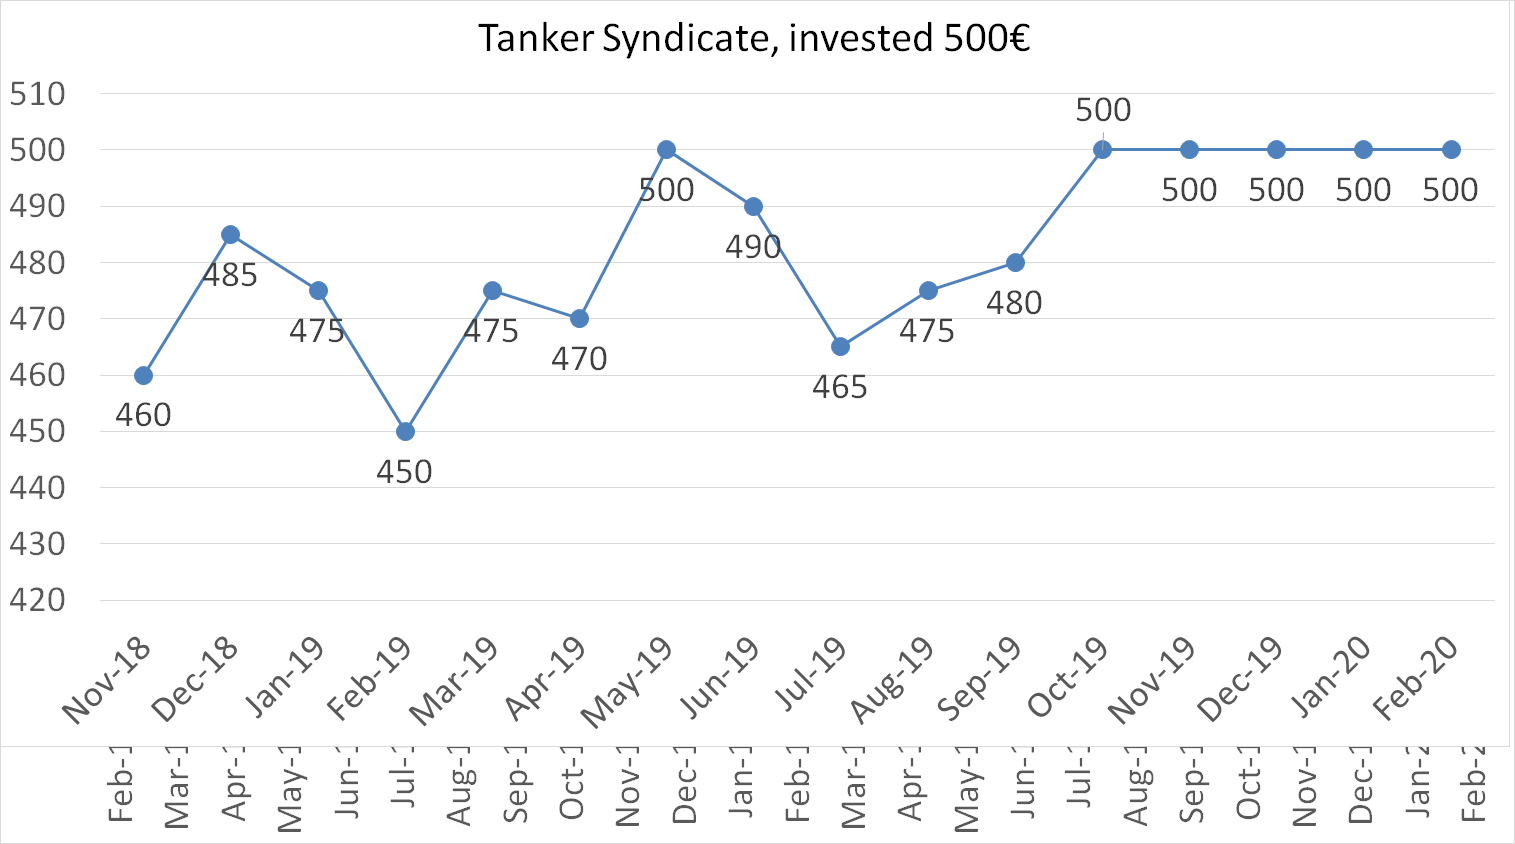 Tanker Syndicate, invested 500€, february 2020